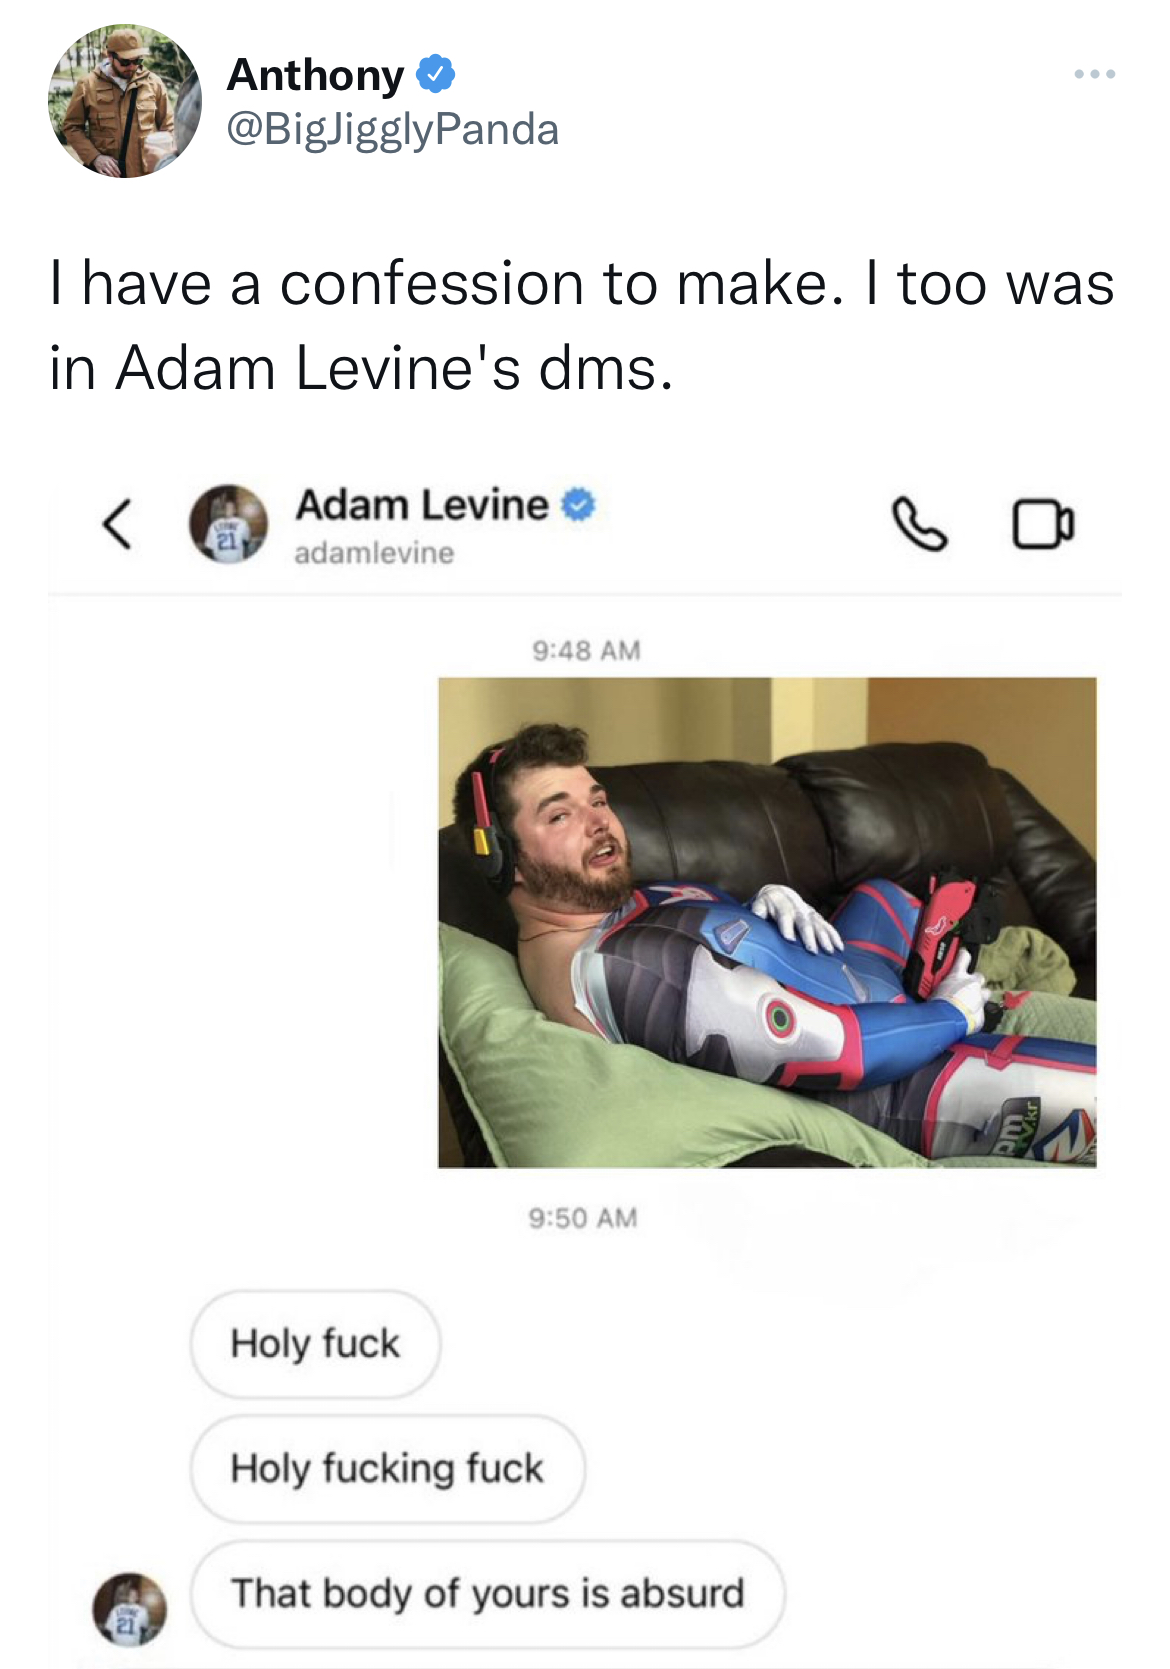 viral and funny tweets - website - Anthony I have a confession to make. I too was in Adam Levine's dms. Adam Levine adamlevine Holy fuck Holy fucking fuck That body of yours is absurd